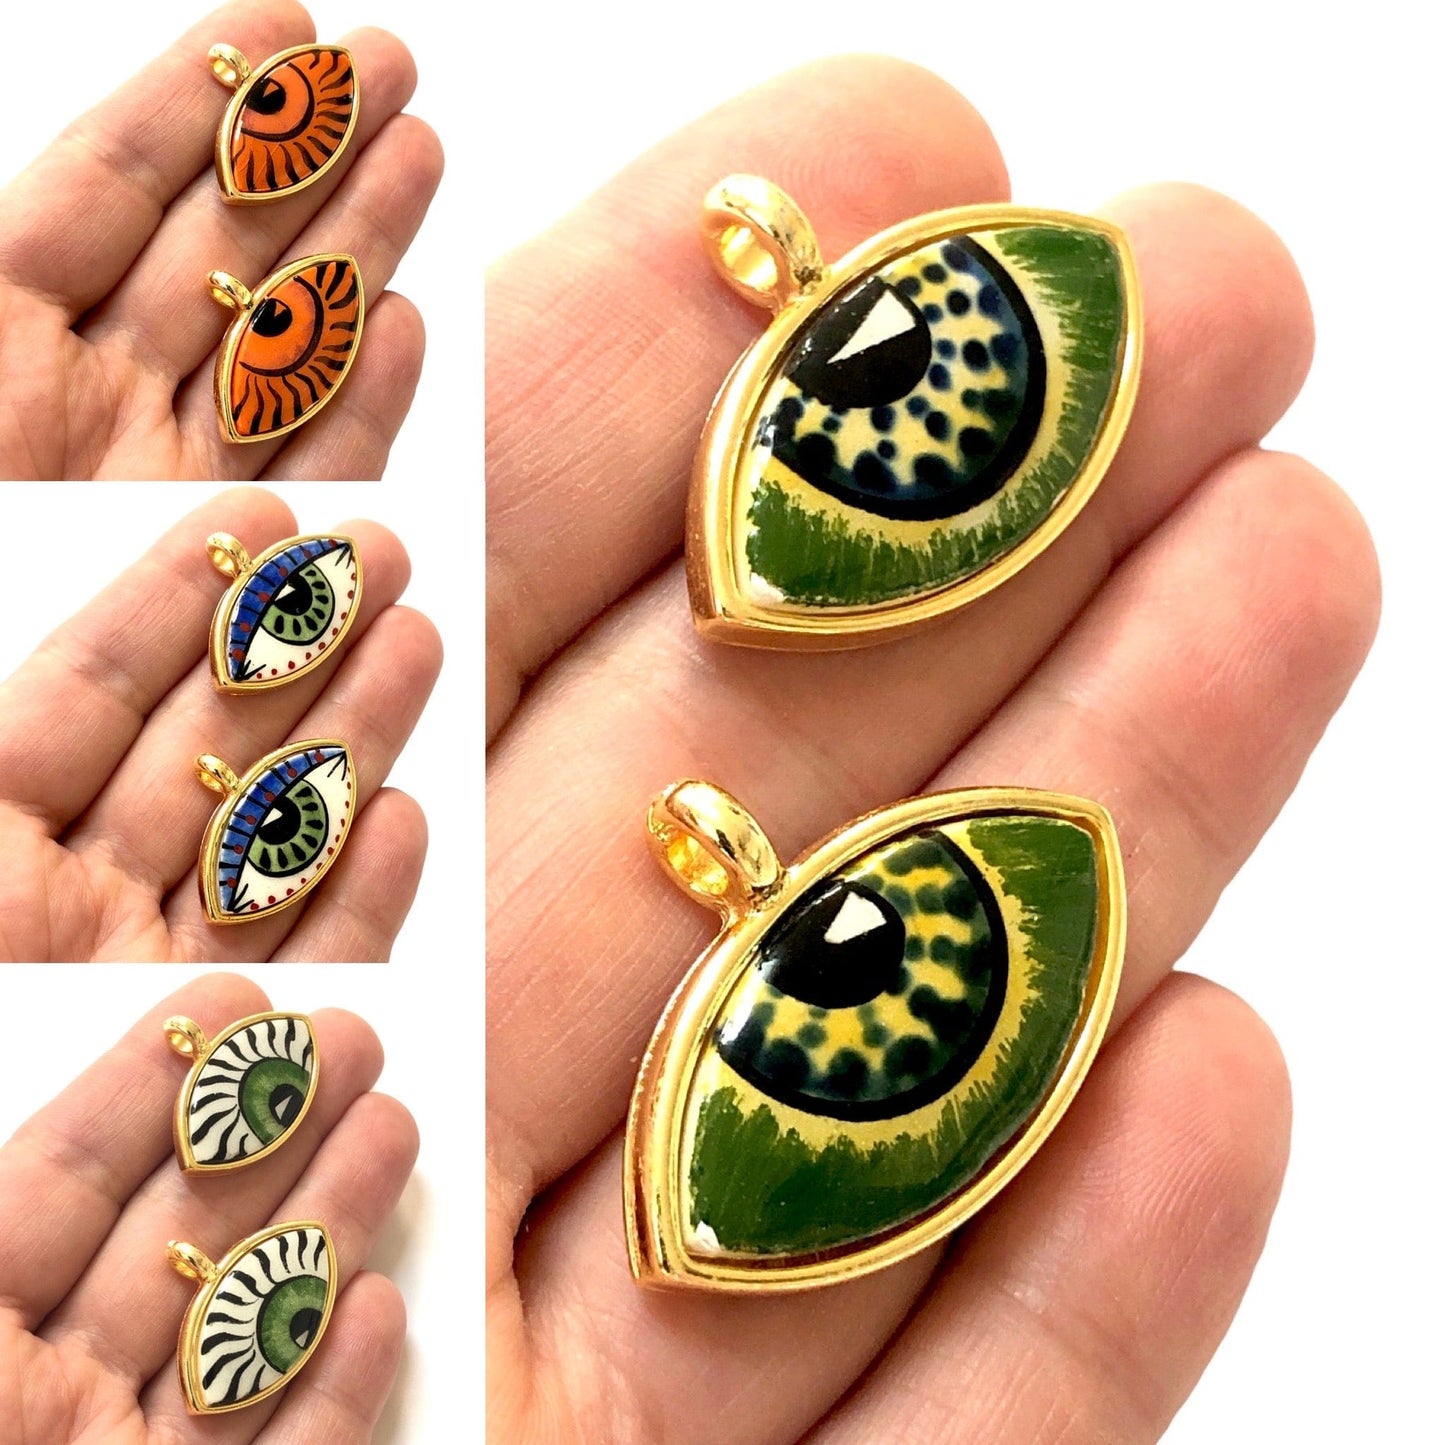 Large Gold Plated Framed Hand Painted Ceramic Eye Pendant-013